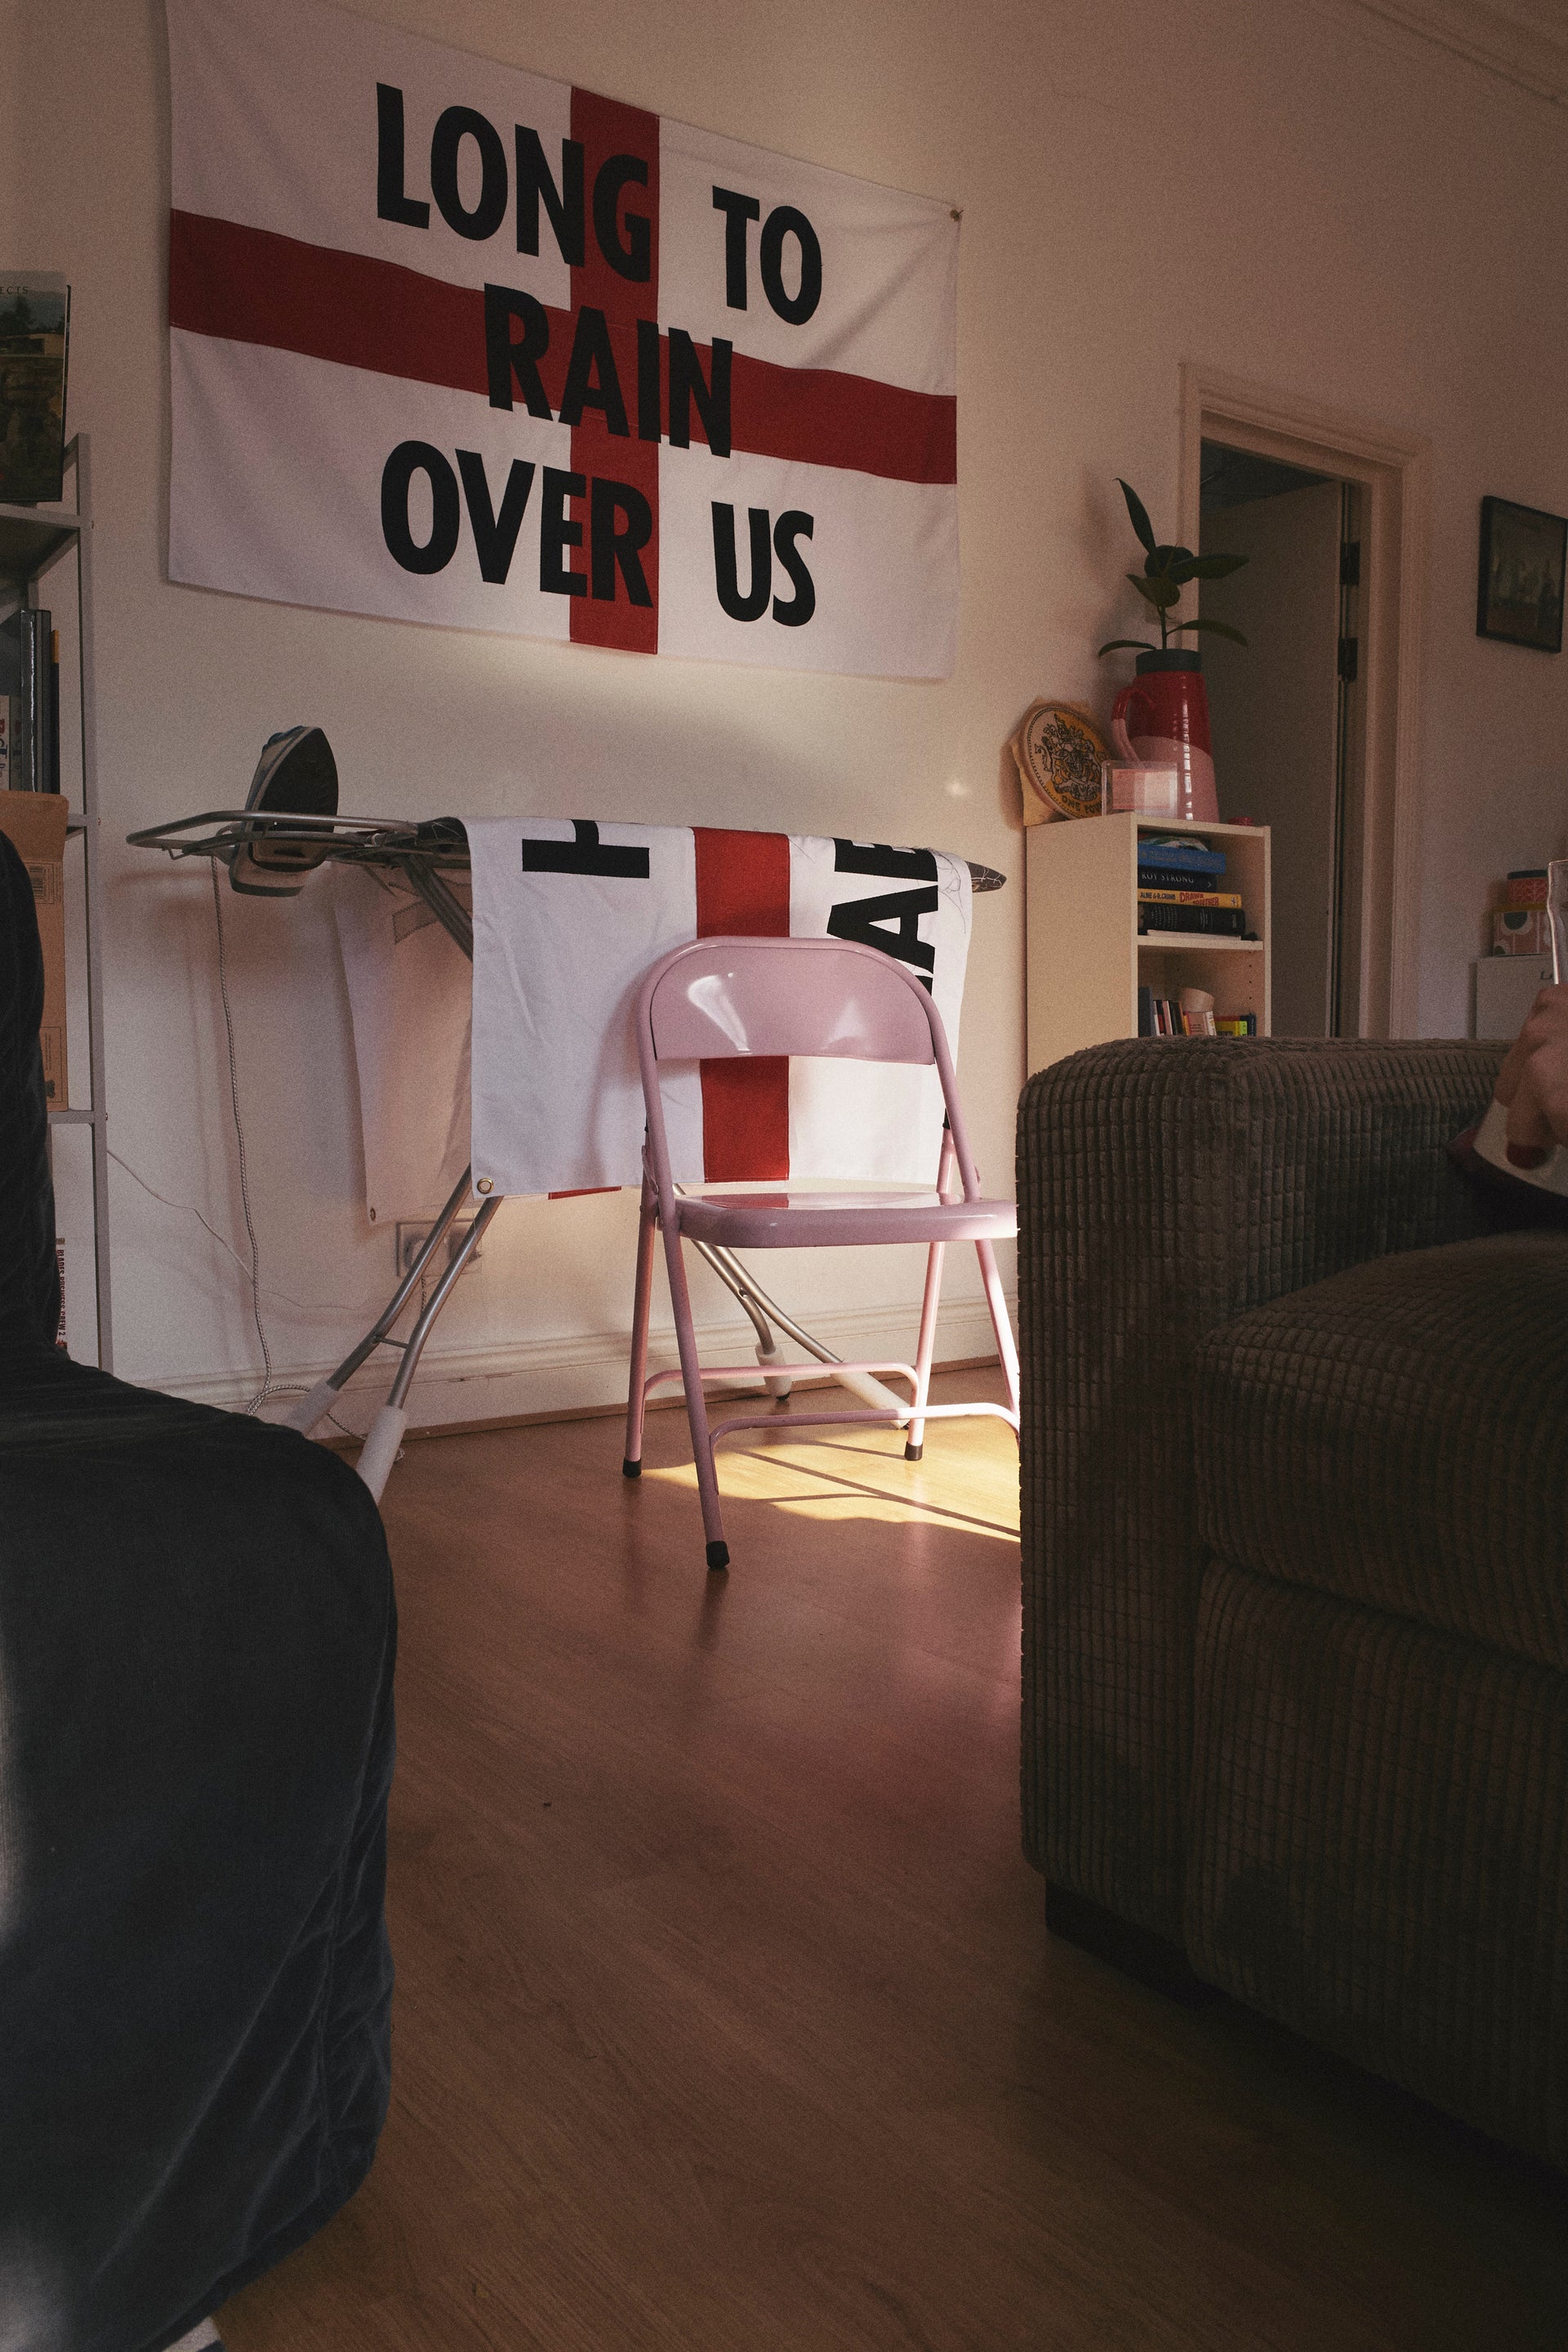 Living room of artist Corbin Shaw, decorated with his flag artwork